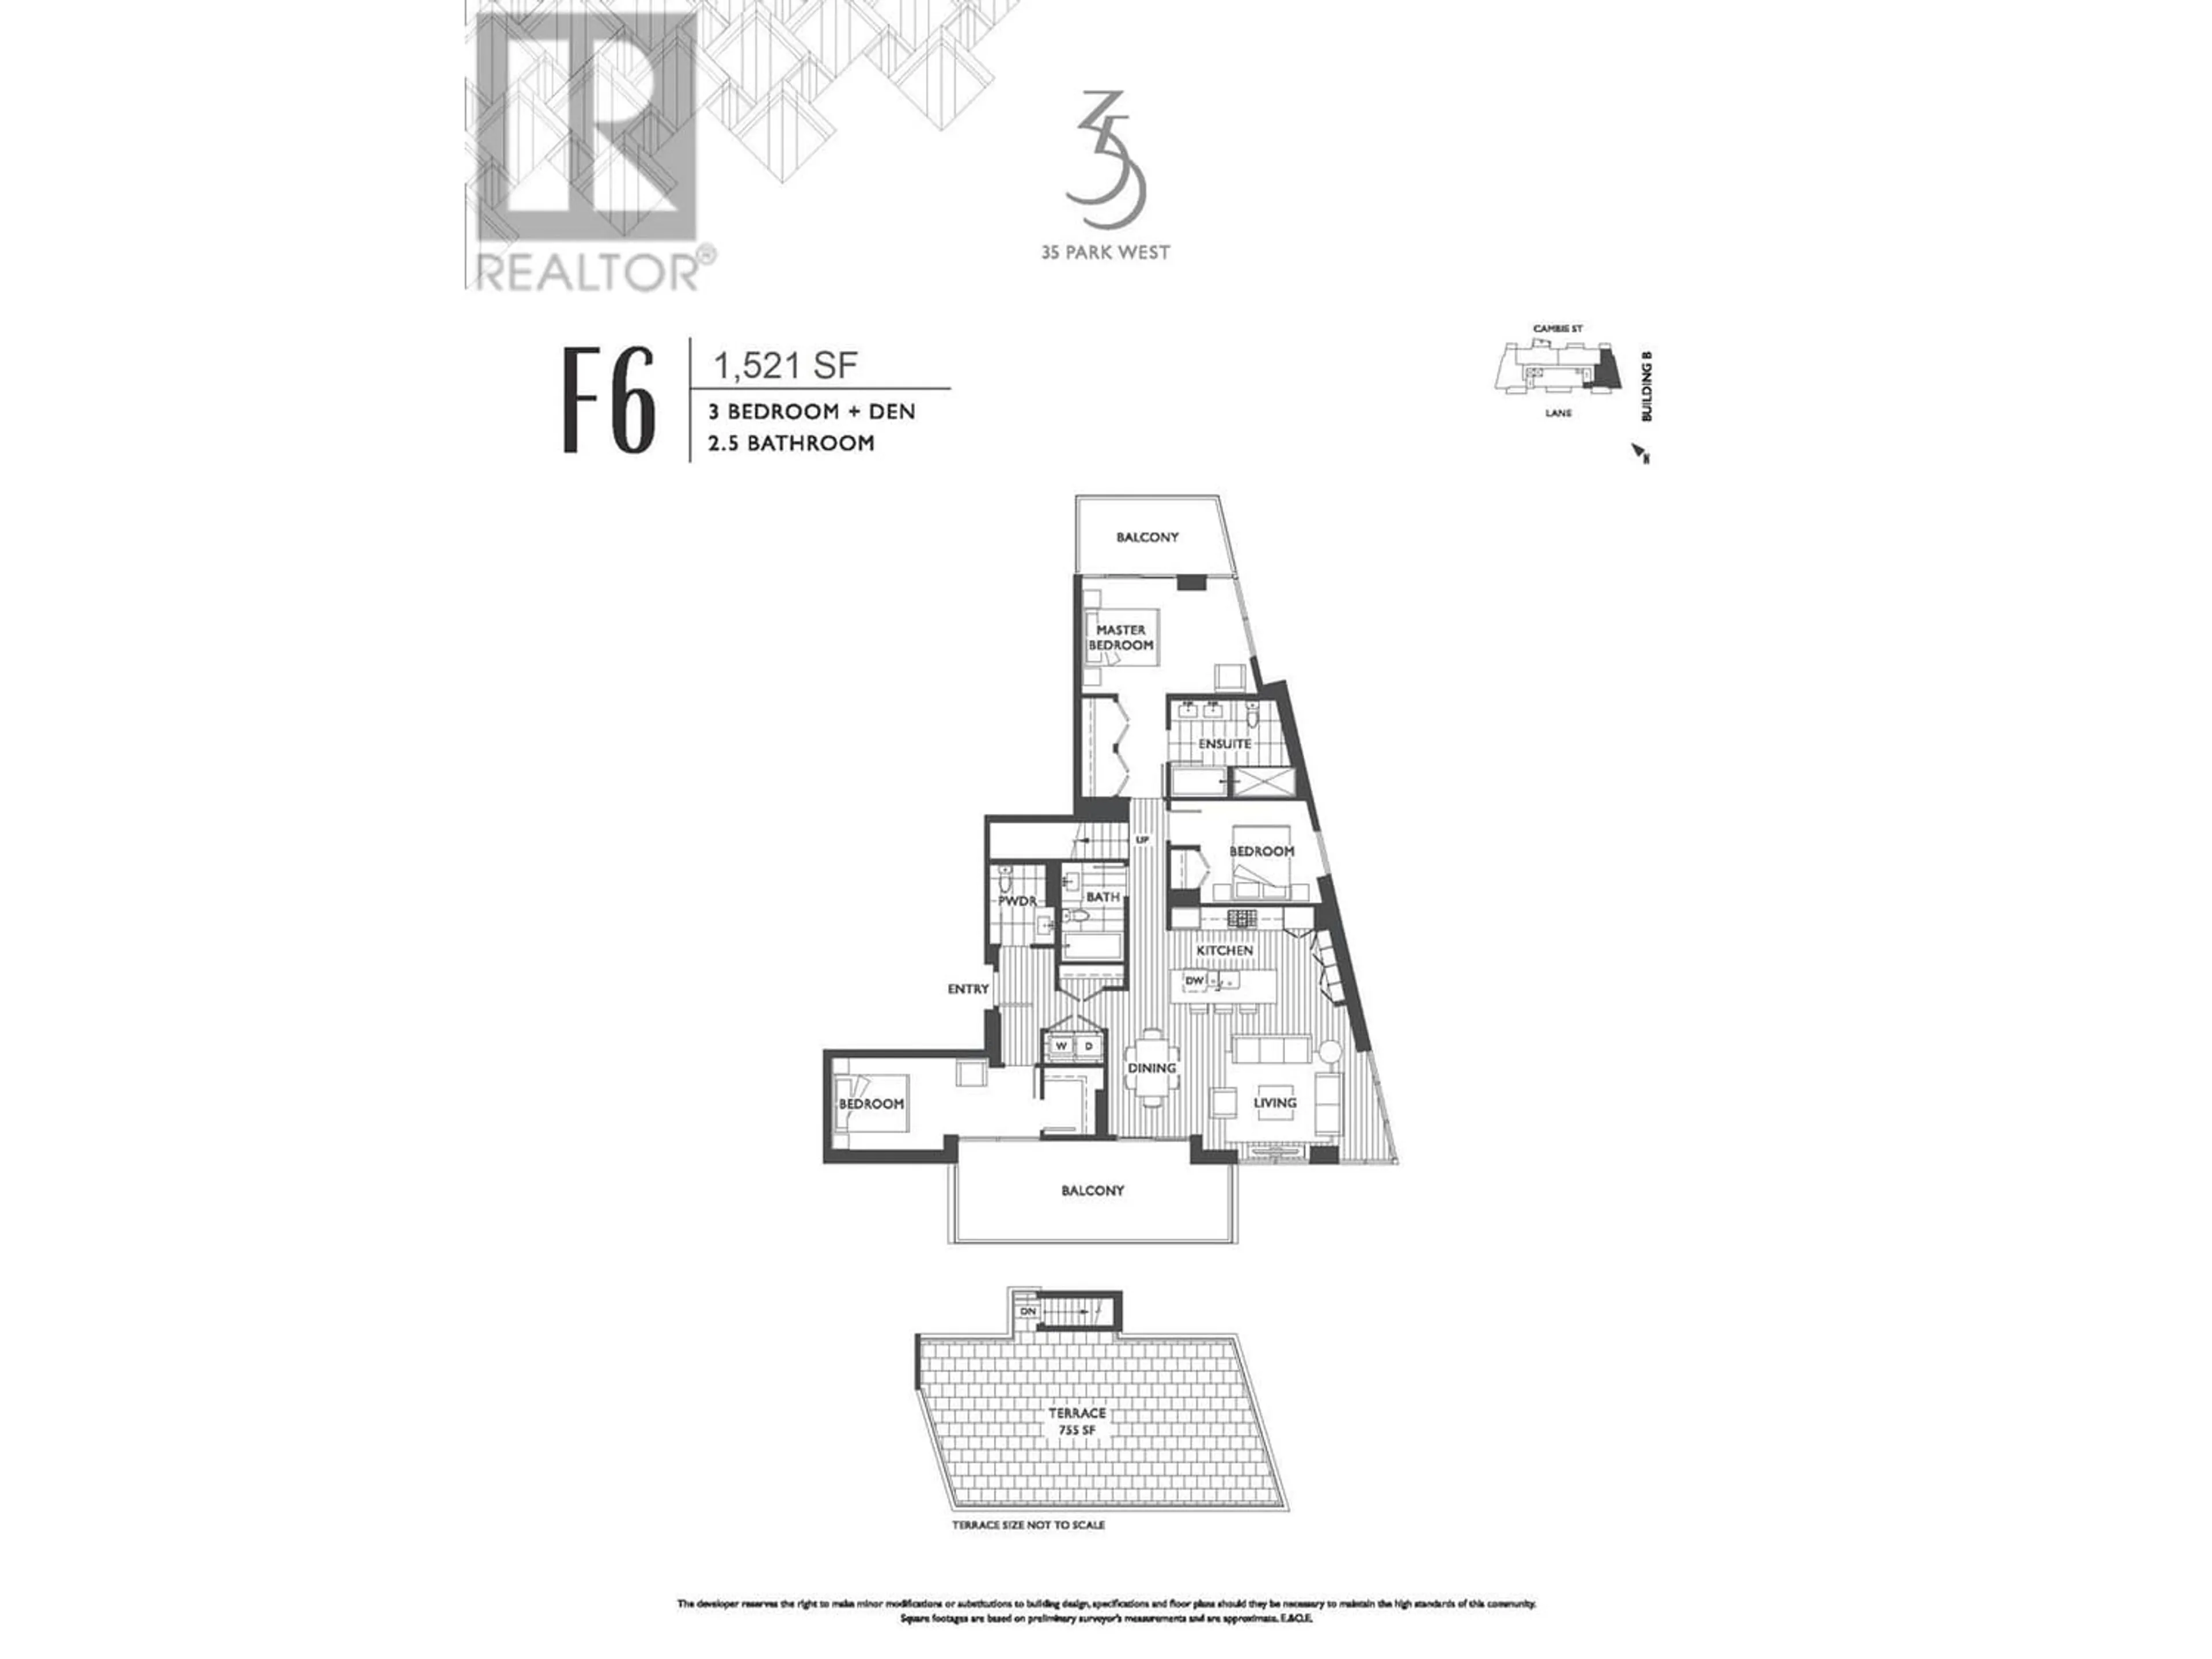 Floor plan for 604 5033 CAMBIE STREET, Vancouver British Columbia V5Z0H6